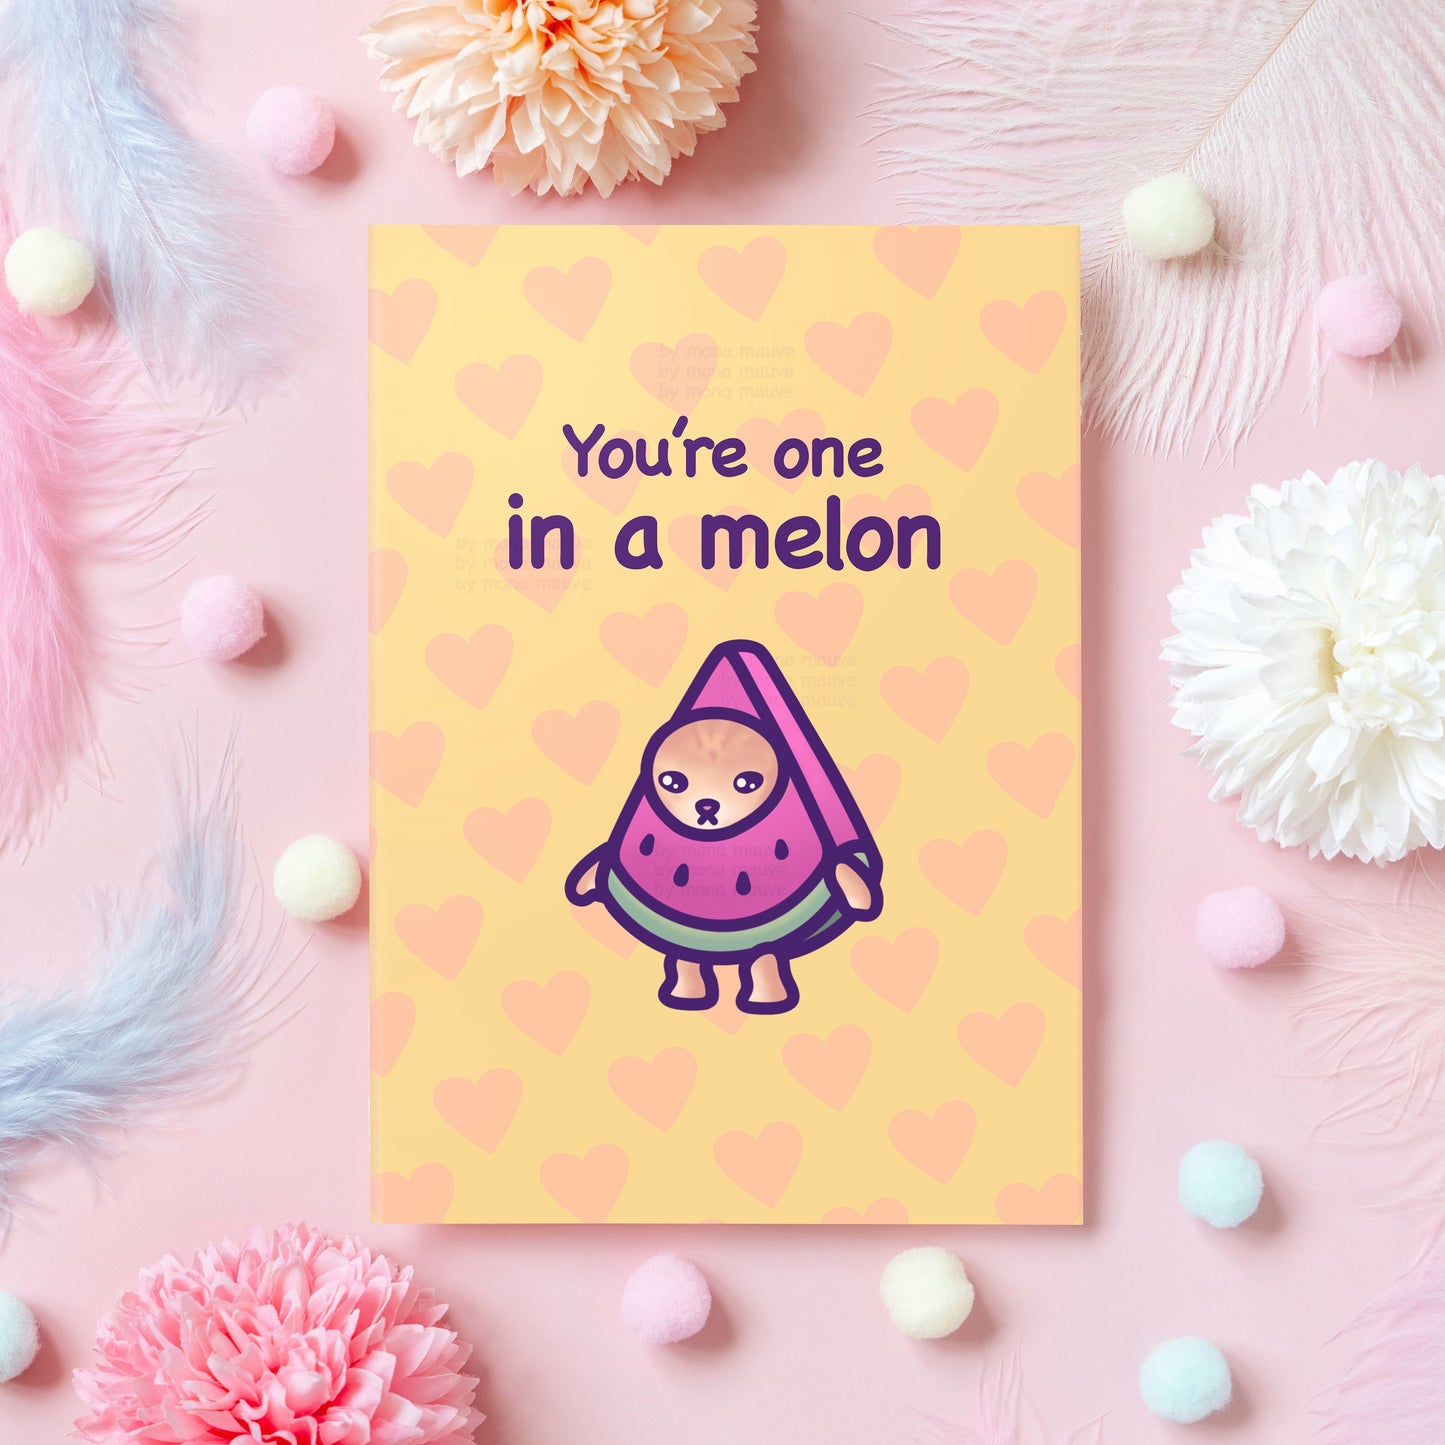 Cute Cat Thank You Card | You're One in a Melon! | Funny Pun Appreciation Card for Mom, Dad, Sister, Best Friend